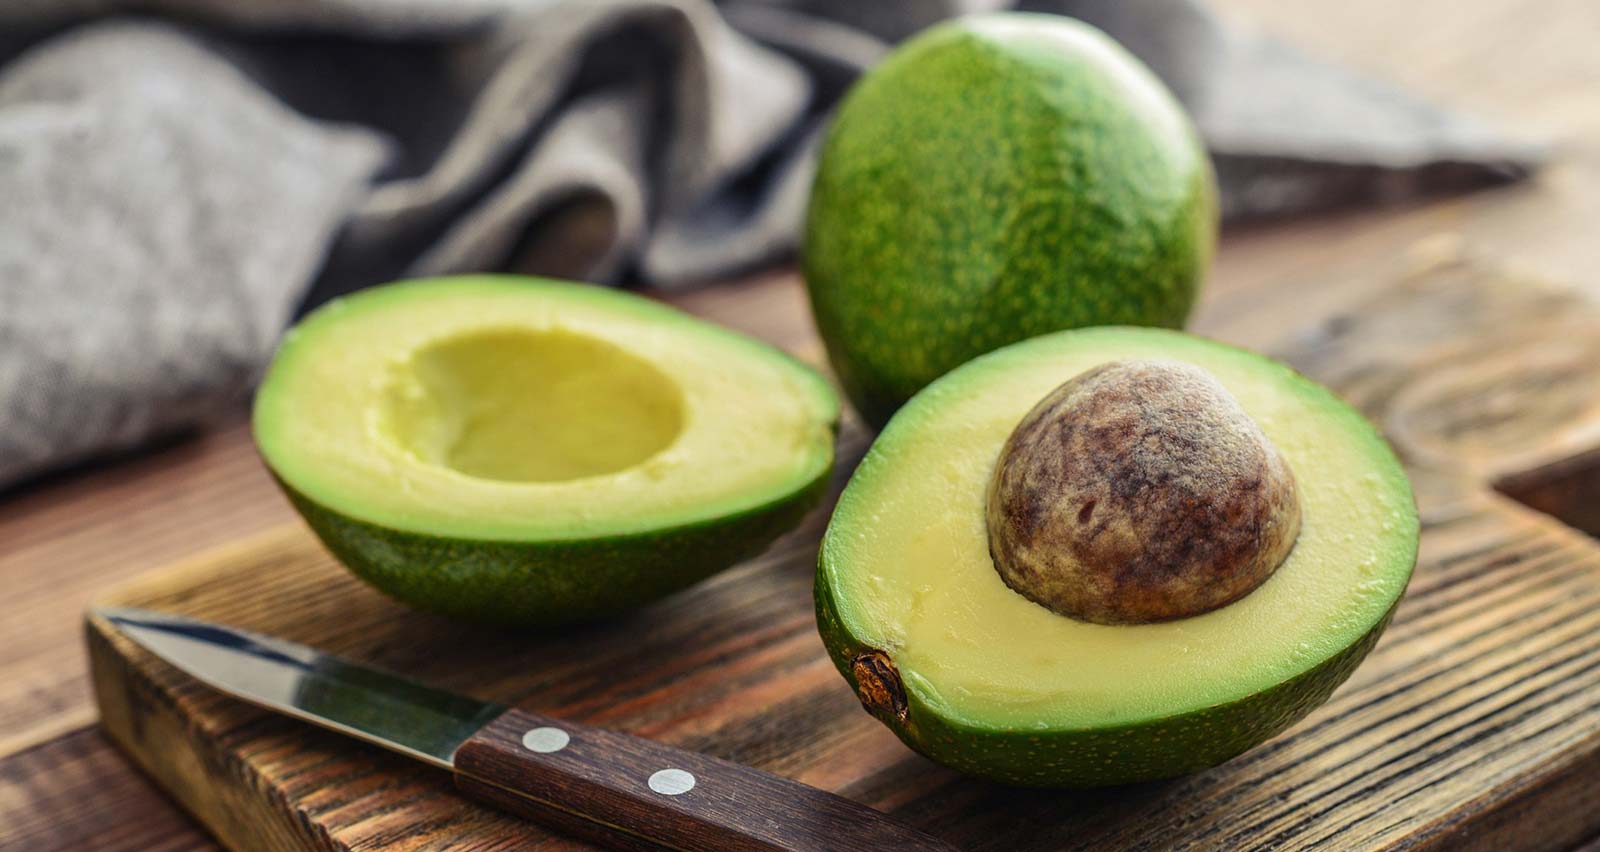 🍓 Sorry, But If You Can’t Pass This Plural Word Test, You Can Never Have Fruits Again Avocados